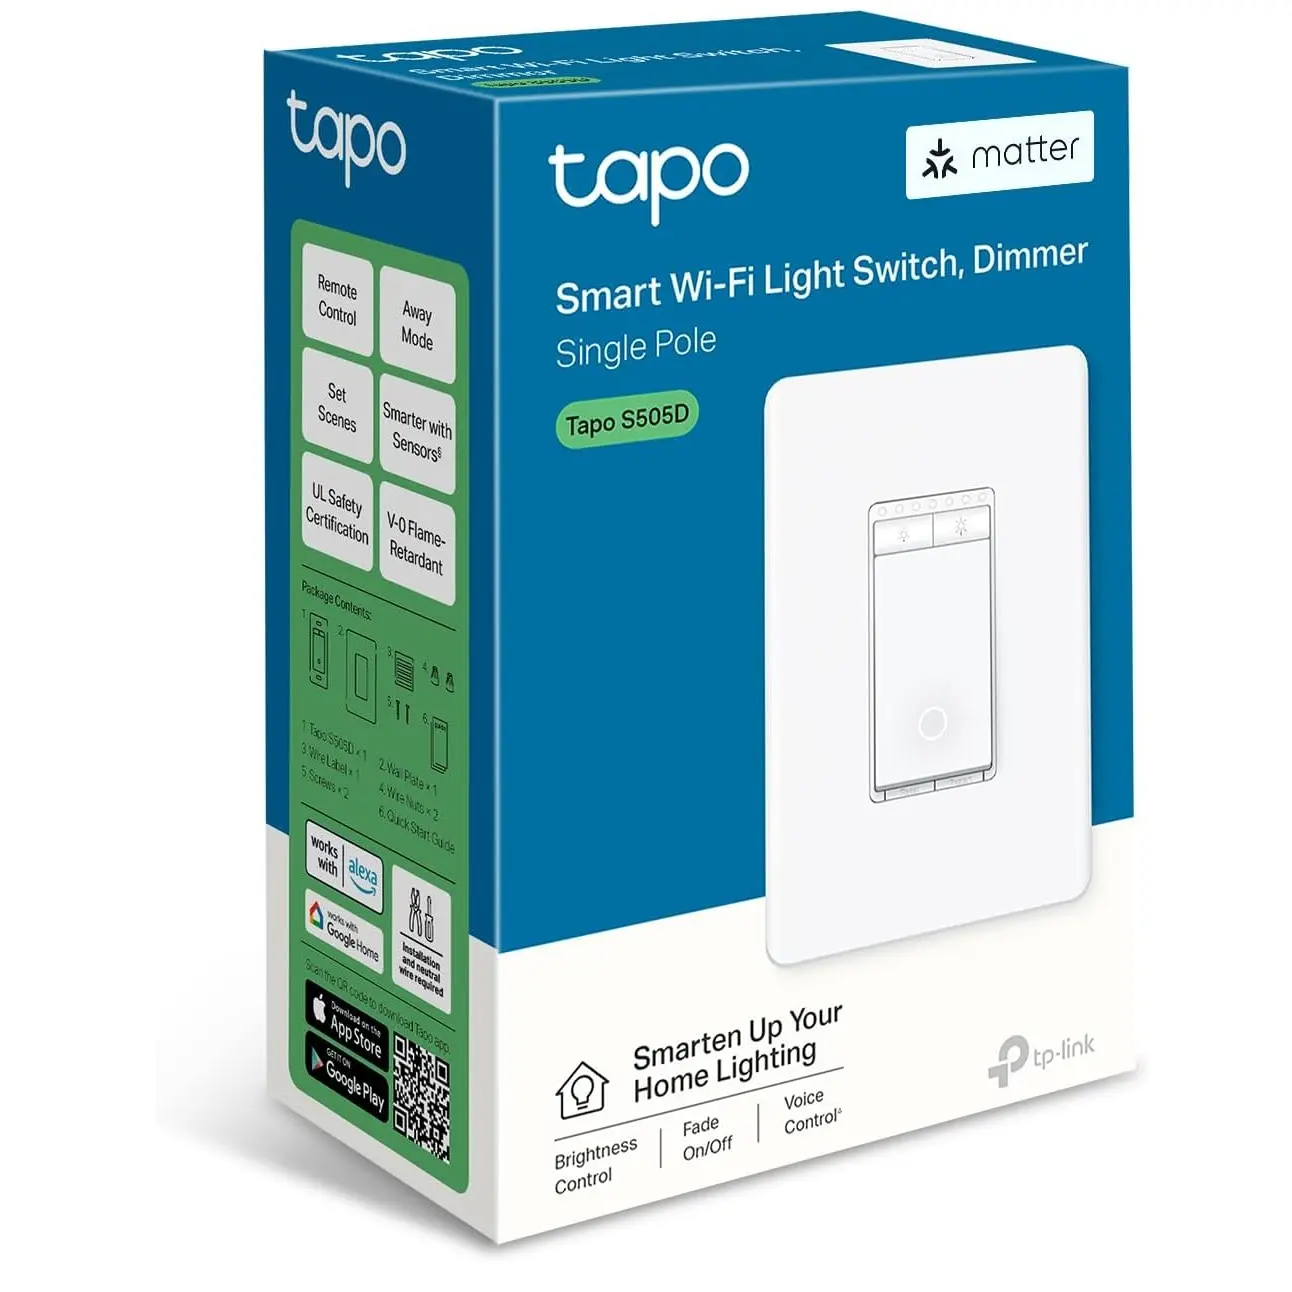 TP-Link's Tapo brand launches Matter-compatible smart lighting